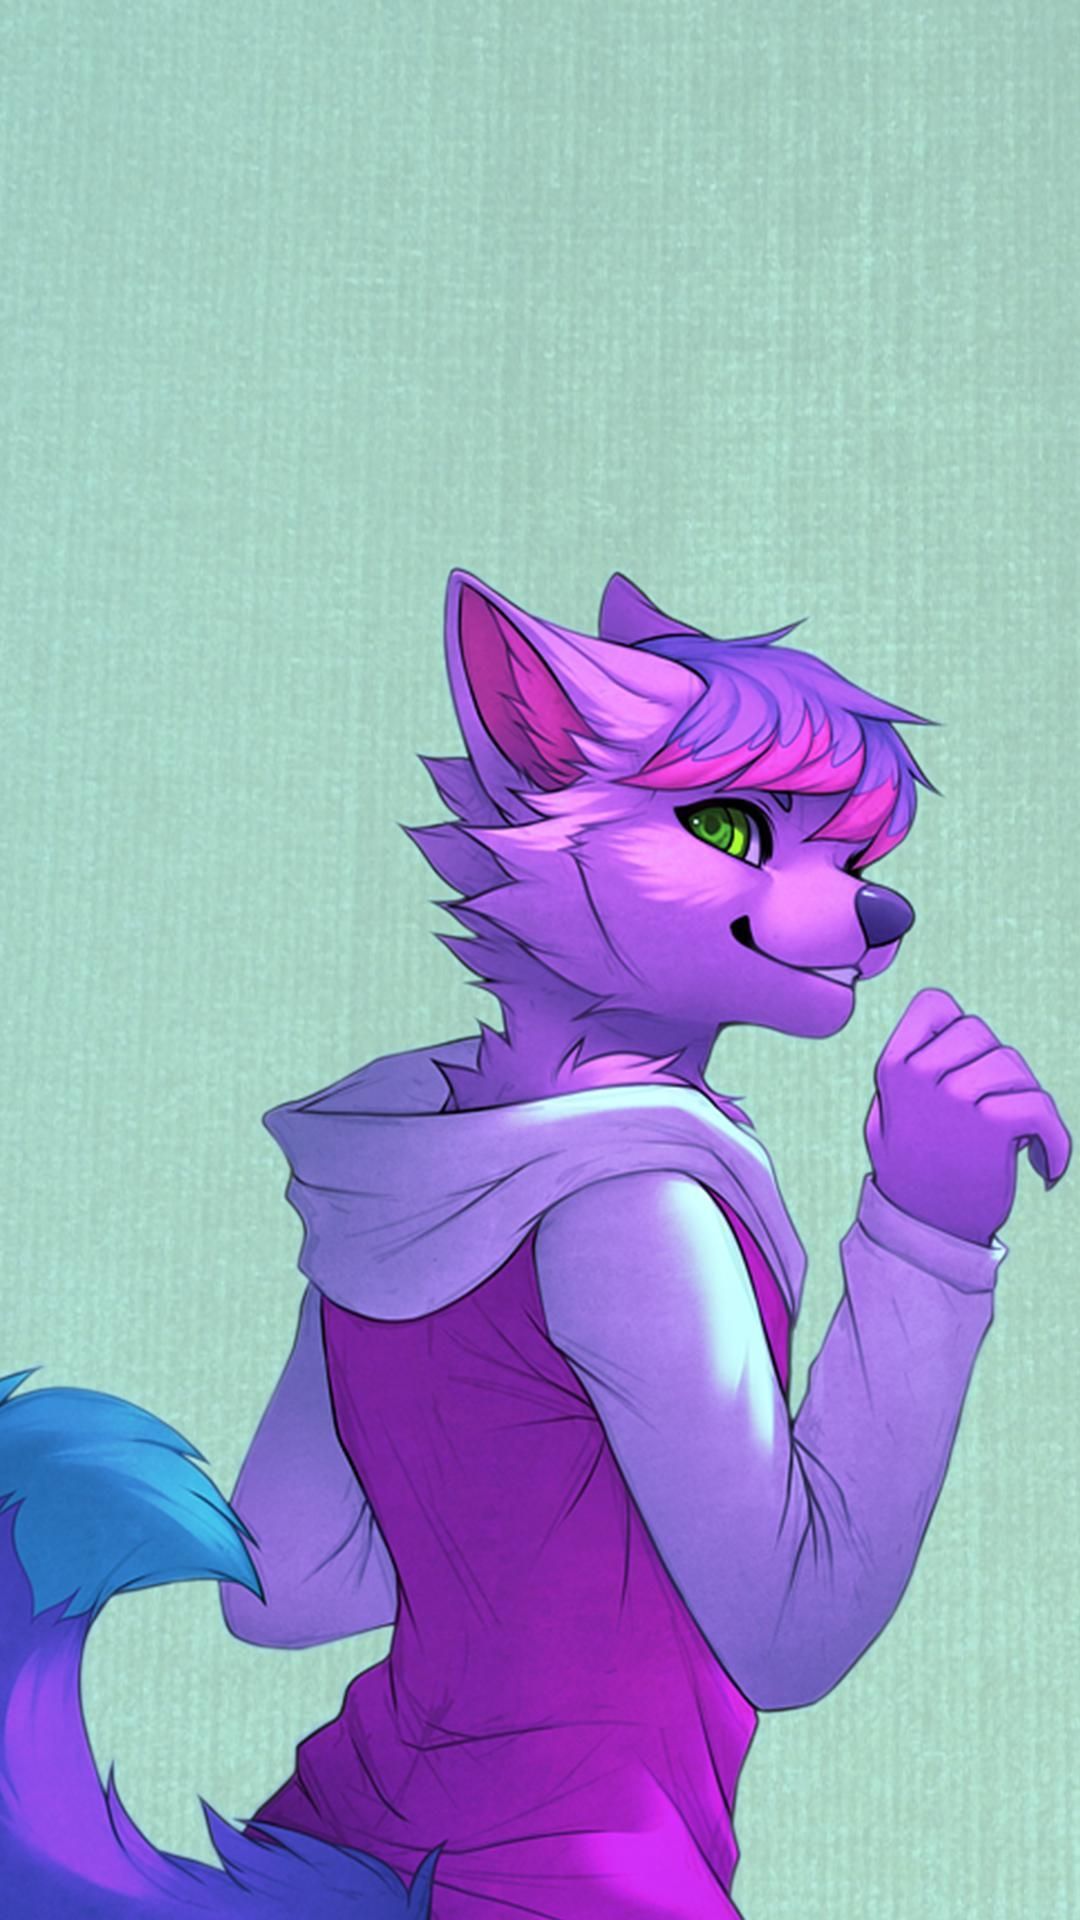 More 1080x1920 Background!!. Furry drawing, Anthro furry